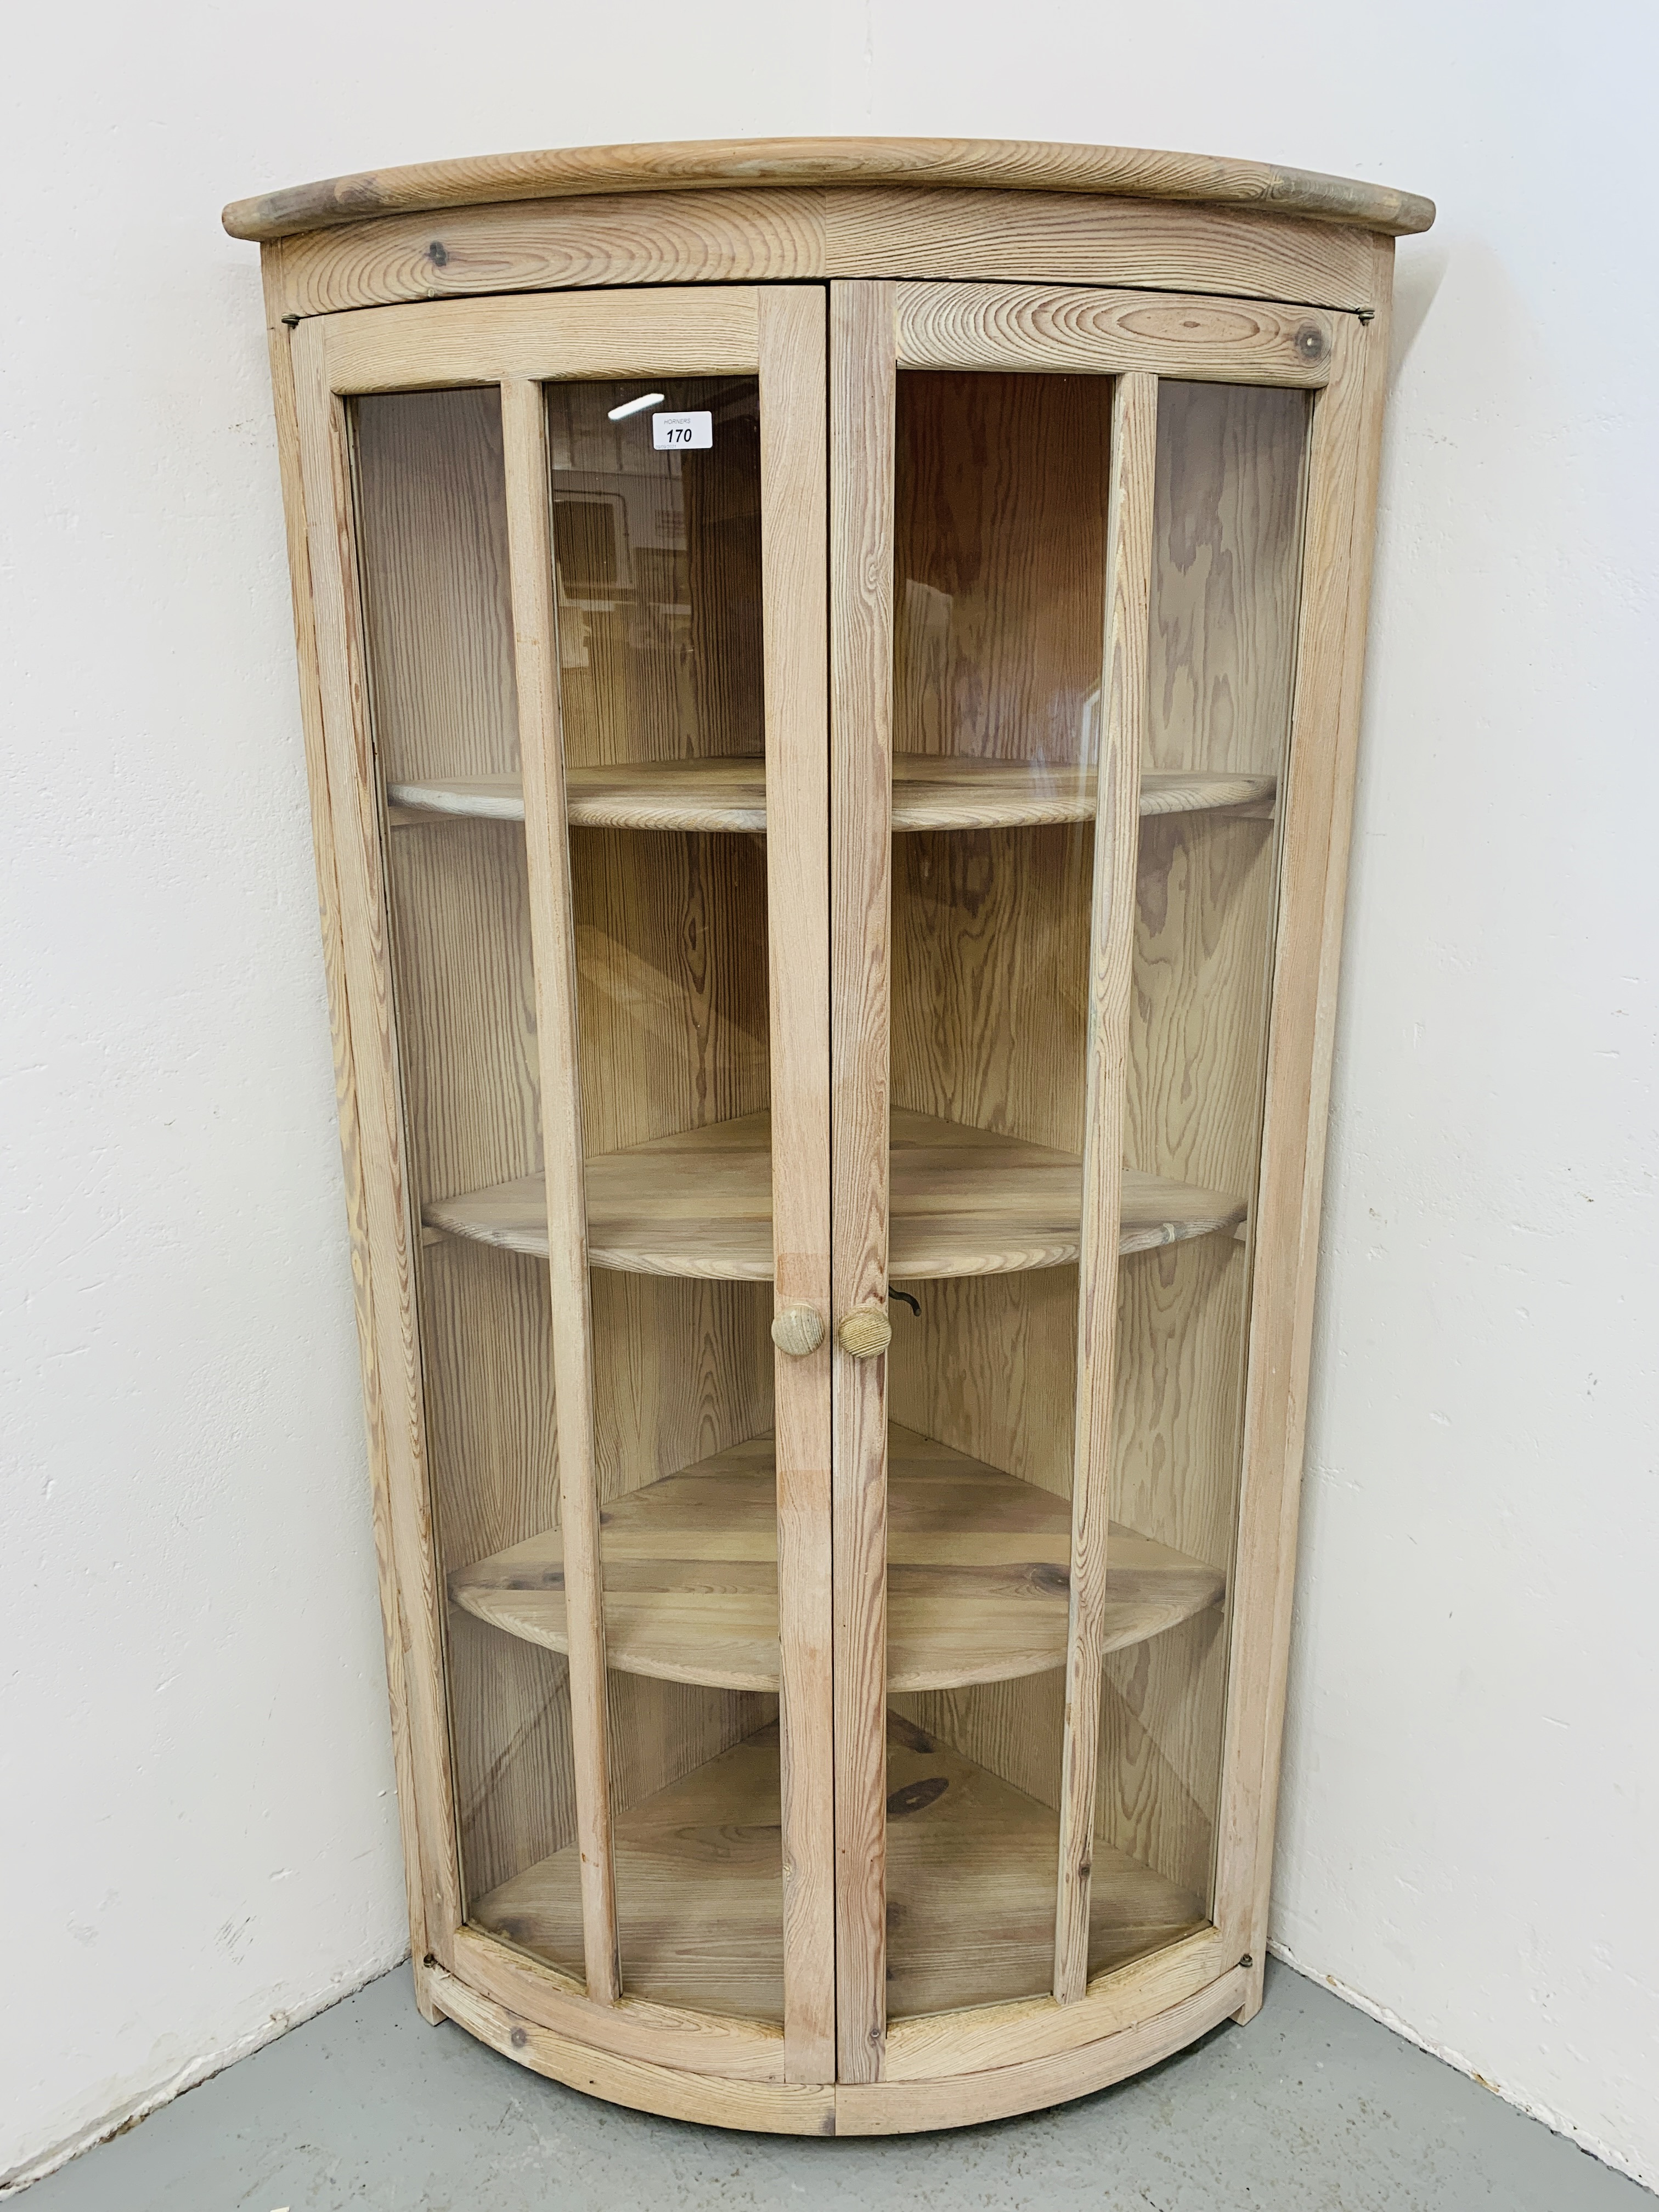 A GOOD QUALITY MODERN LIMED PINE CORNER DISPLAY CABINET MANUFACTURED BY LENO SPAIN - HEIGHT 150CM.